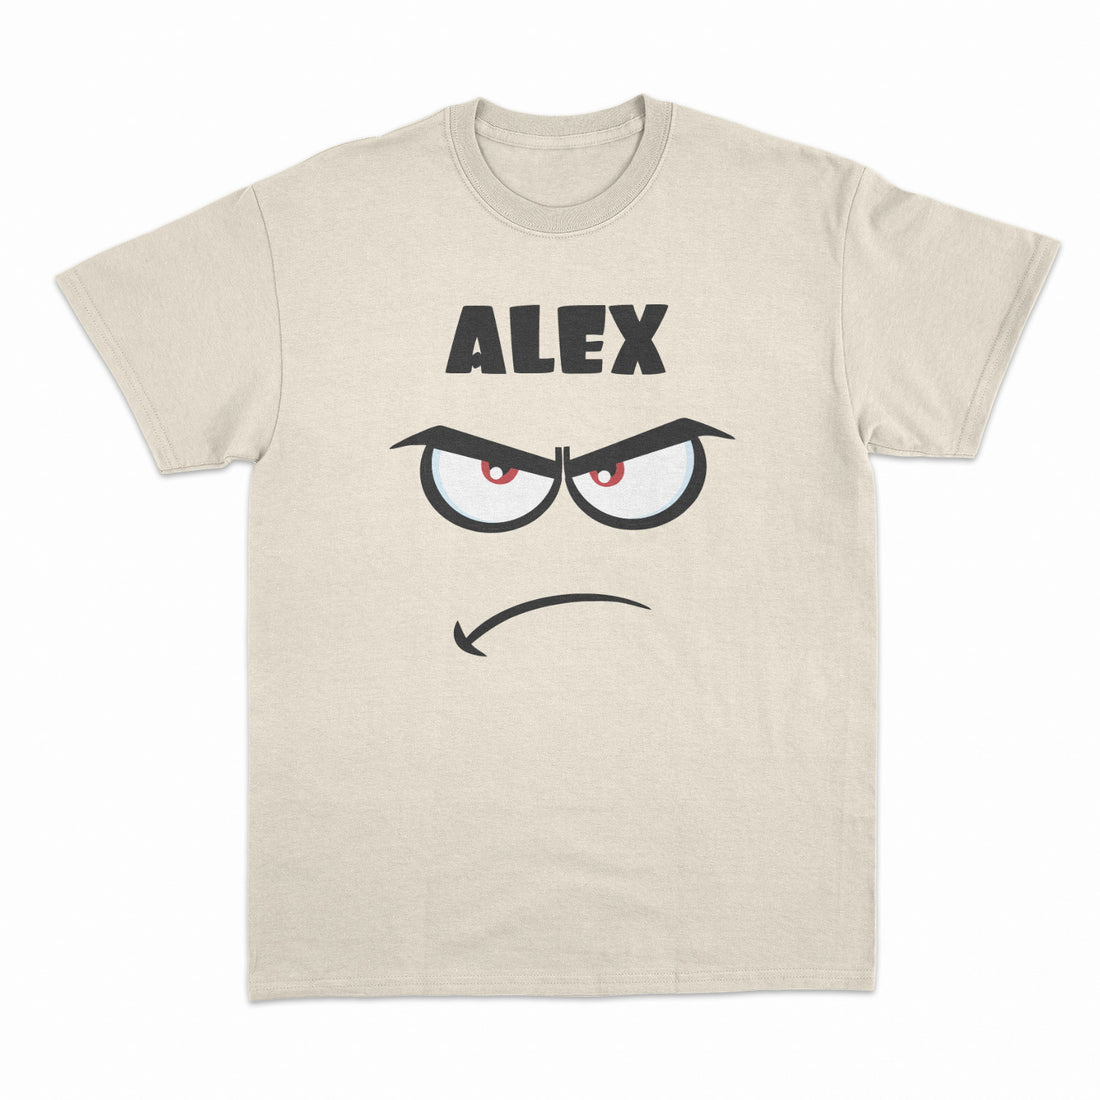 Personalized T-Shirt Monster Illustration With Name